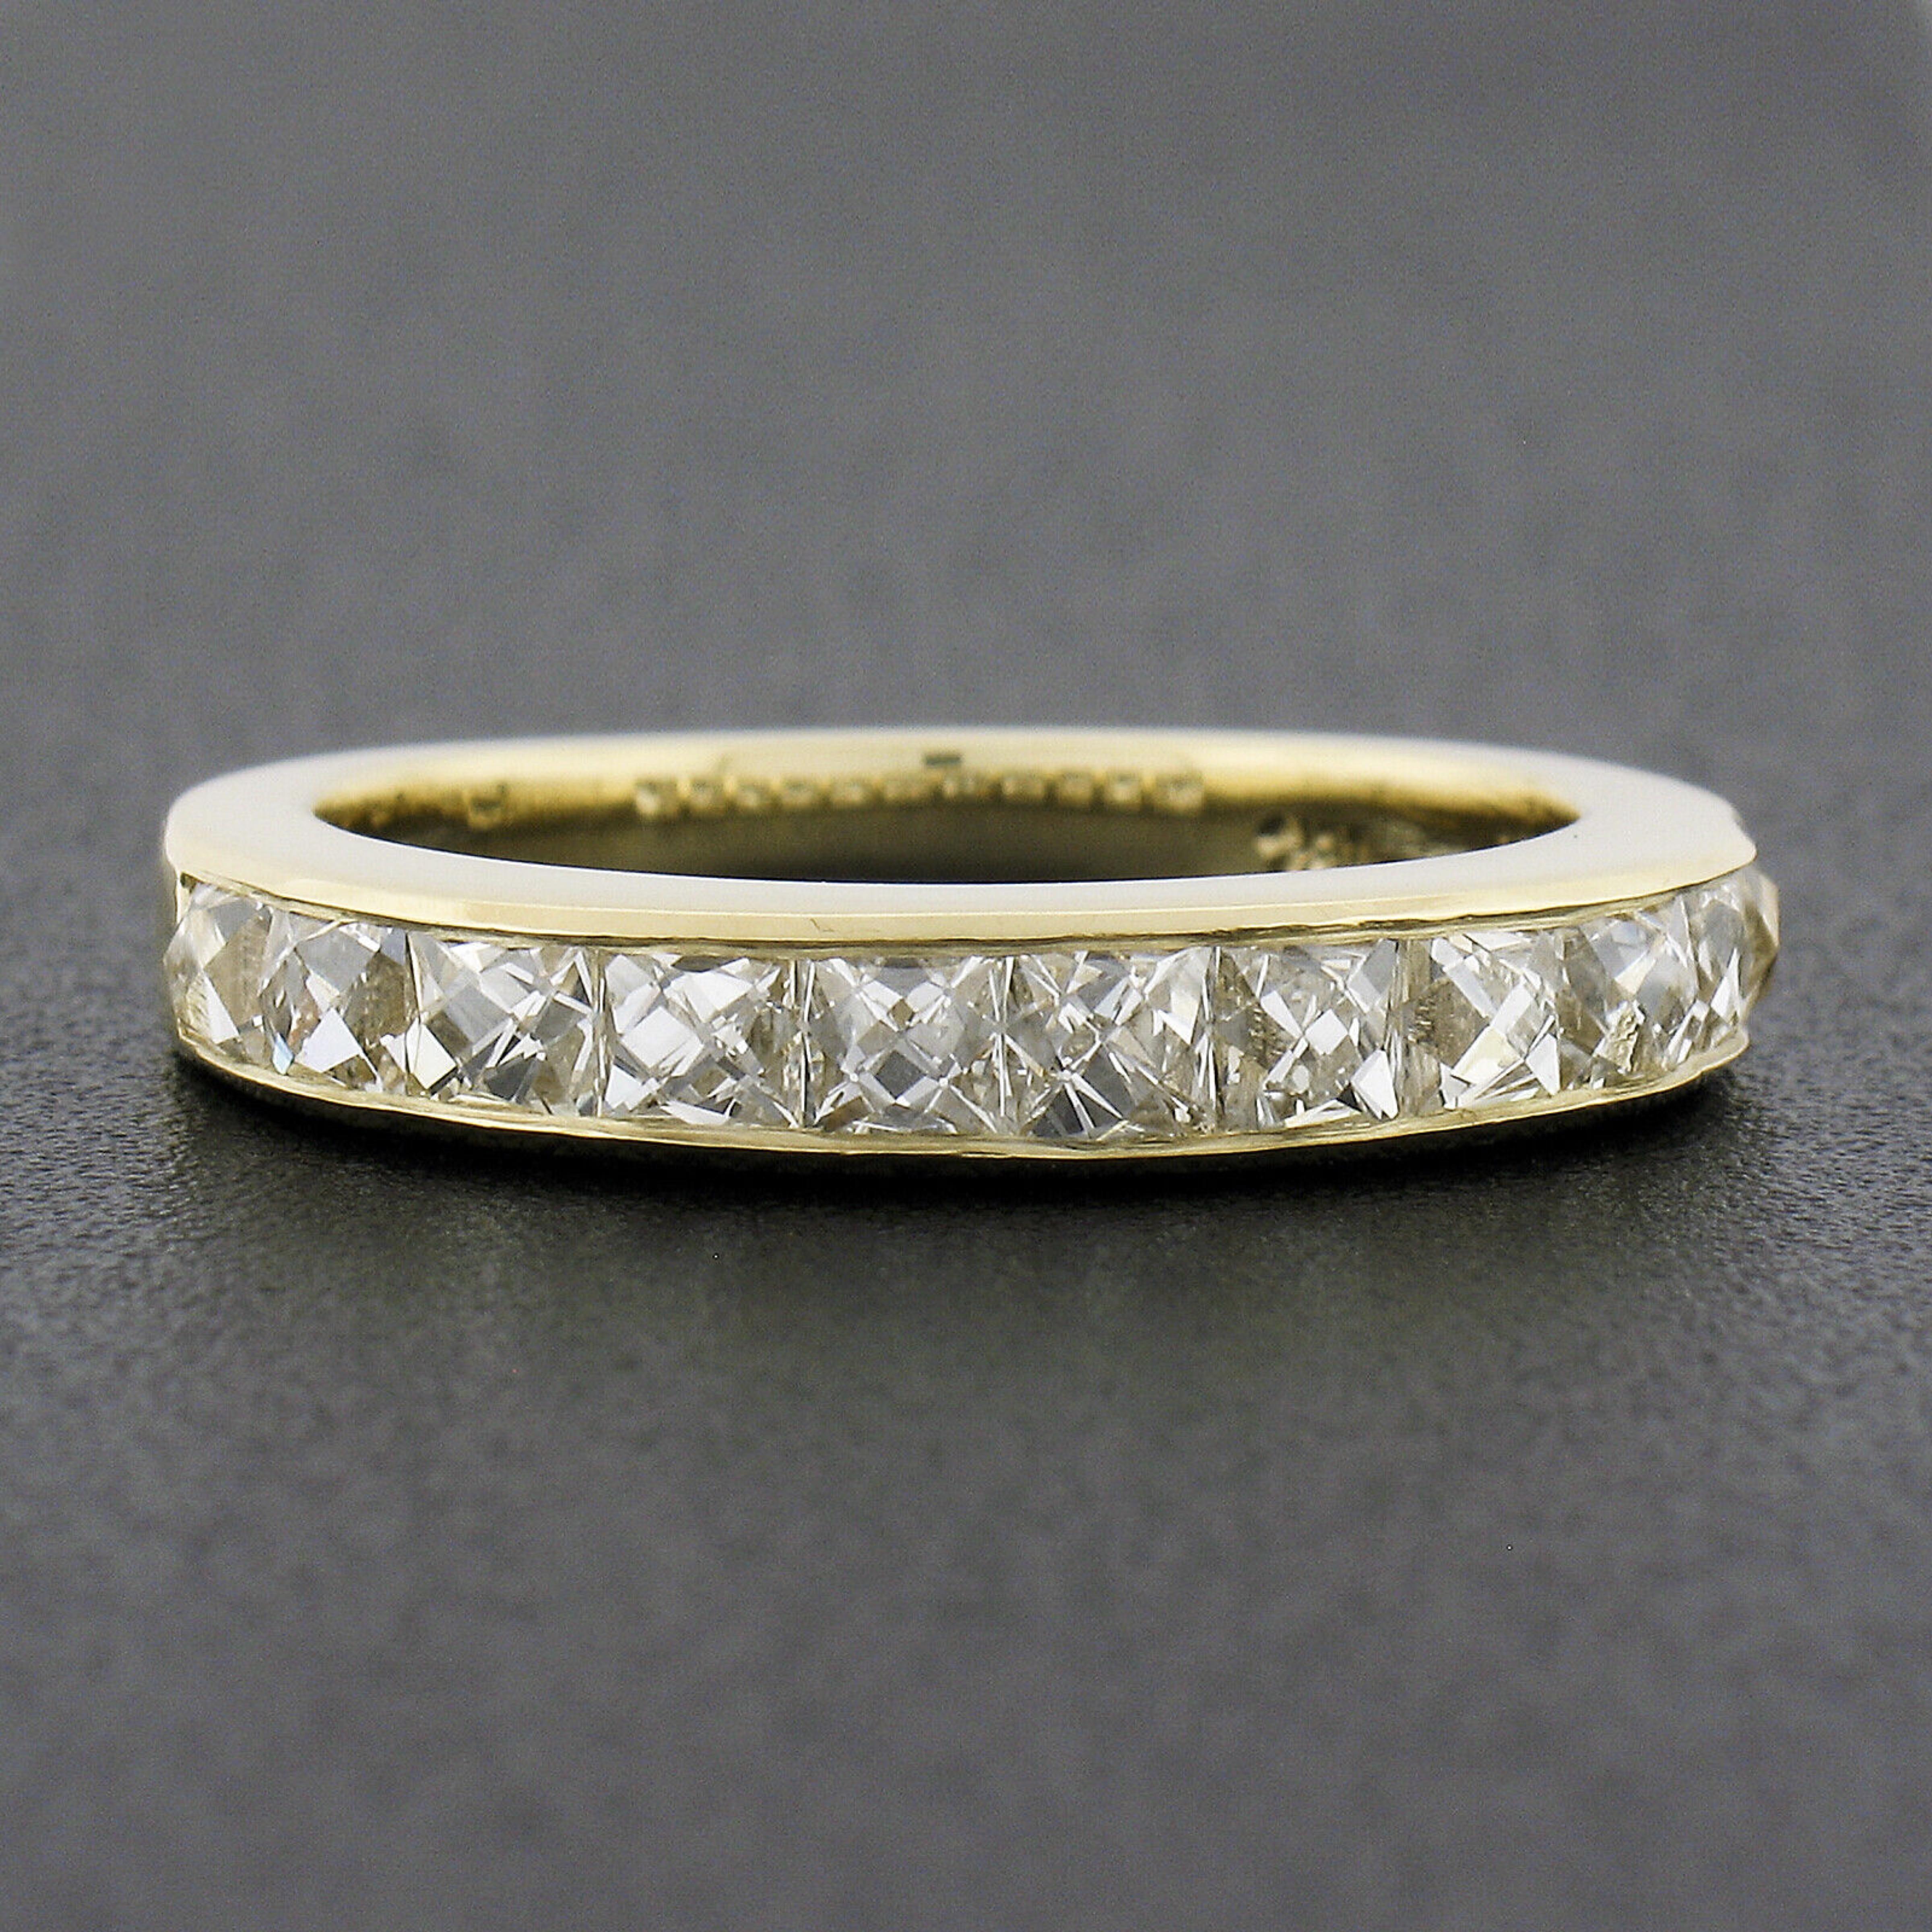 Here we have a brand new diamond band ring that is crafted in solid 18k yellow gold and features 11, very fine quality, square French cut diamonds neatly channel set across its top. These stunning and super lively diamonds total exactly 2.25 carats